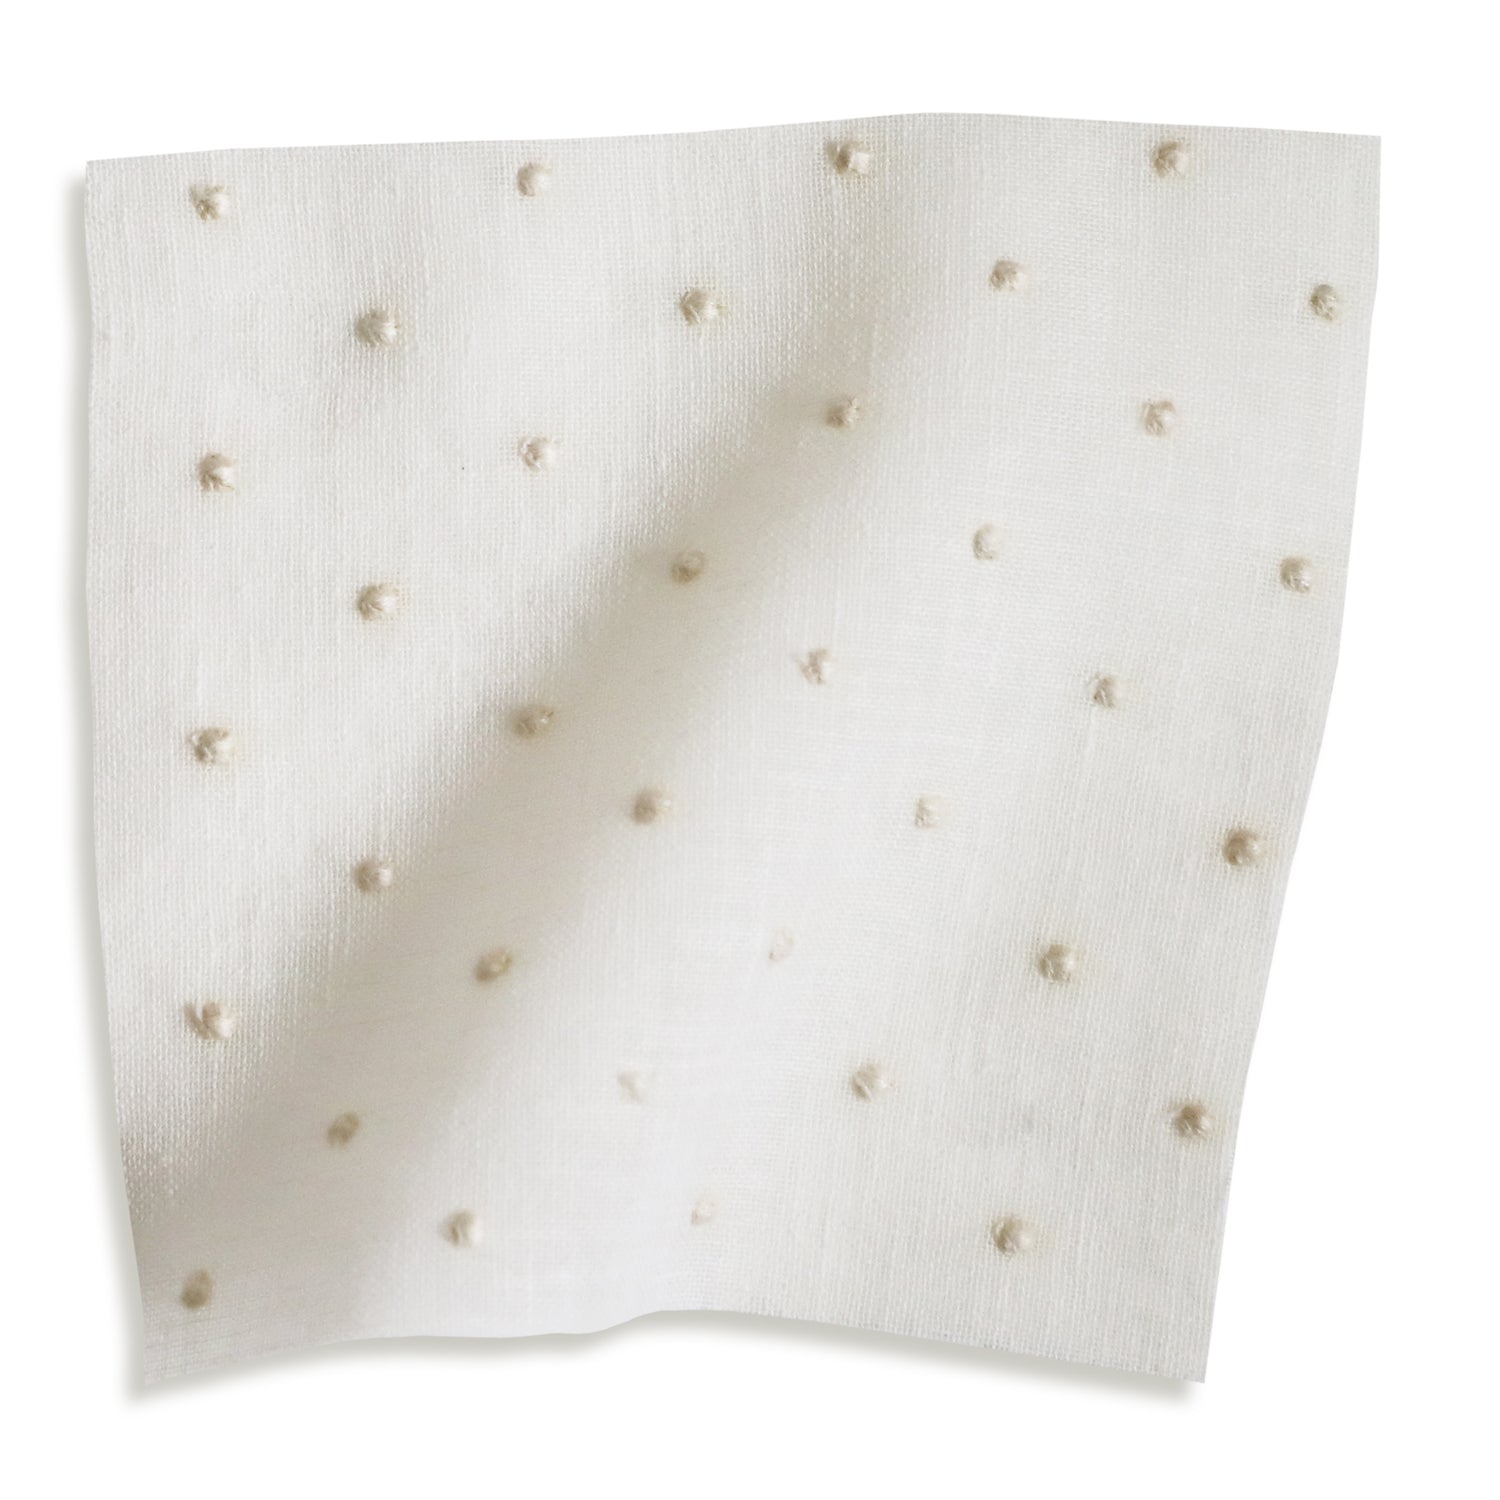 sheer white embroidered cream polka dot fabric swatch